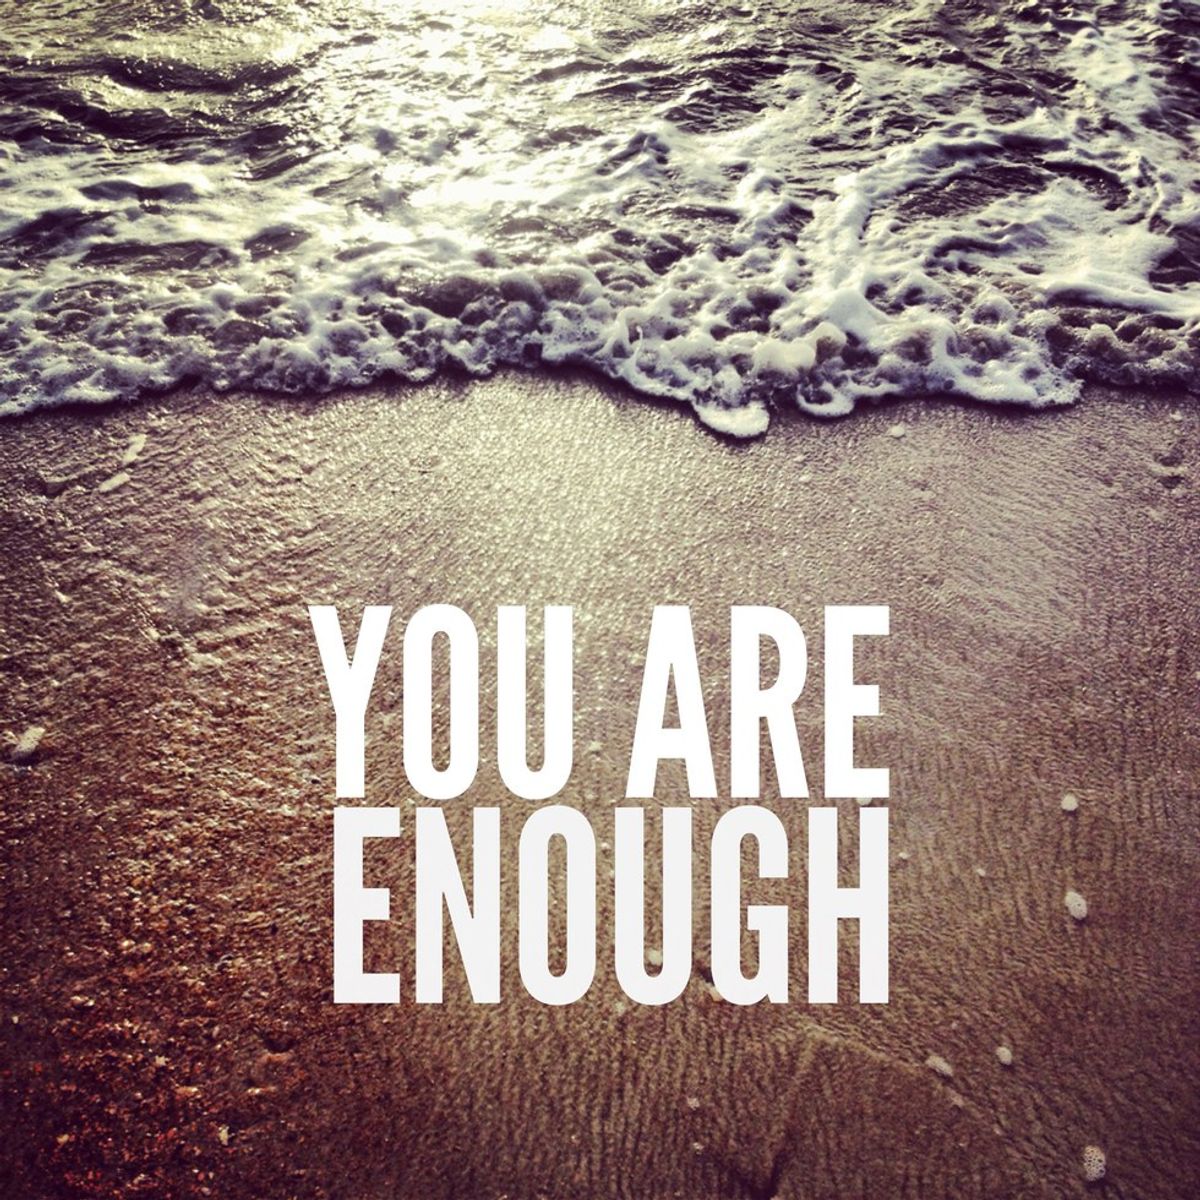 To the Girl Who Doesn't Think She's "Enough"